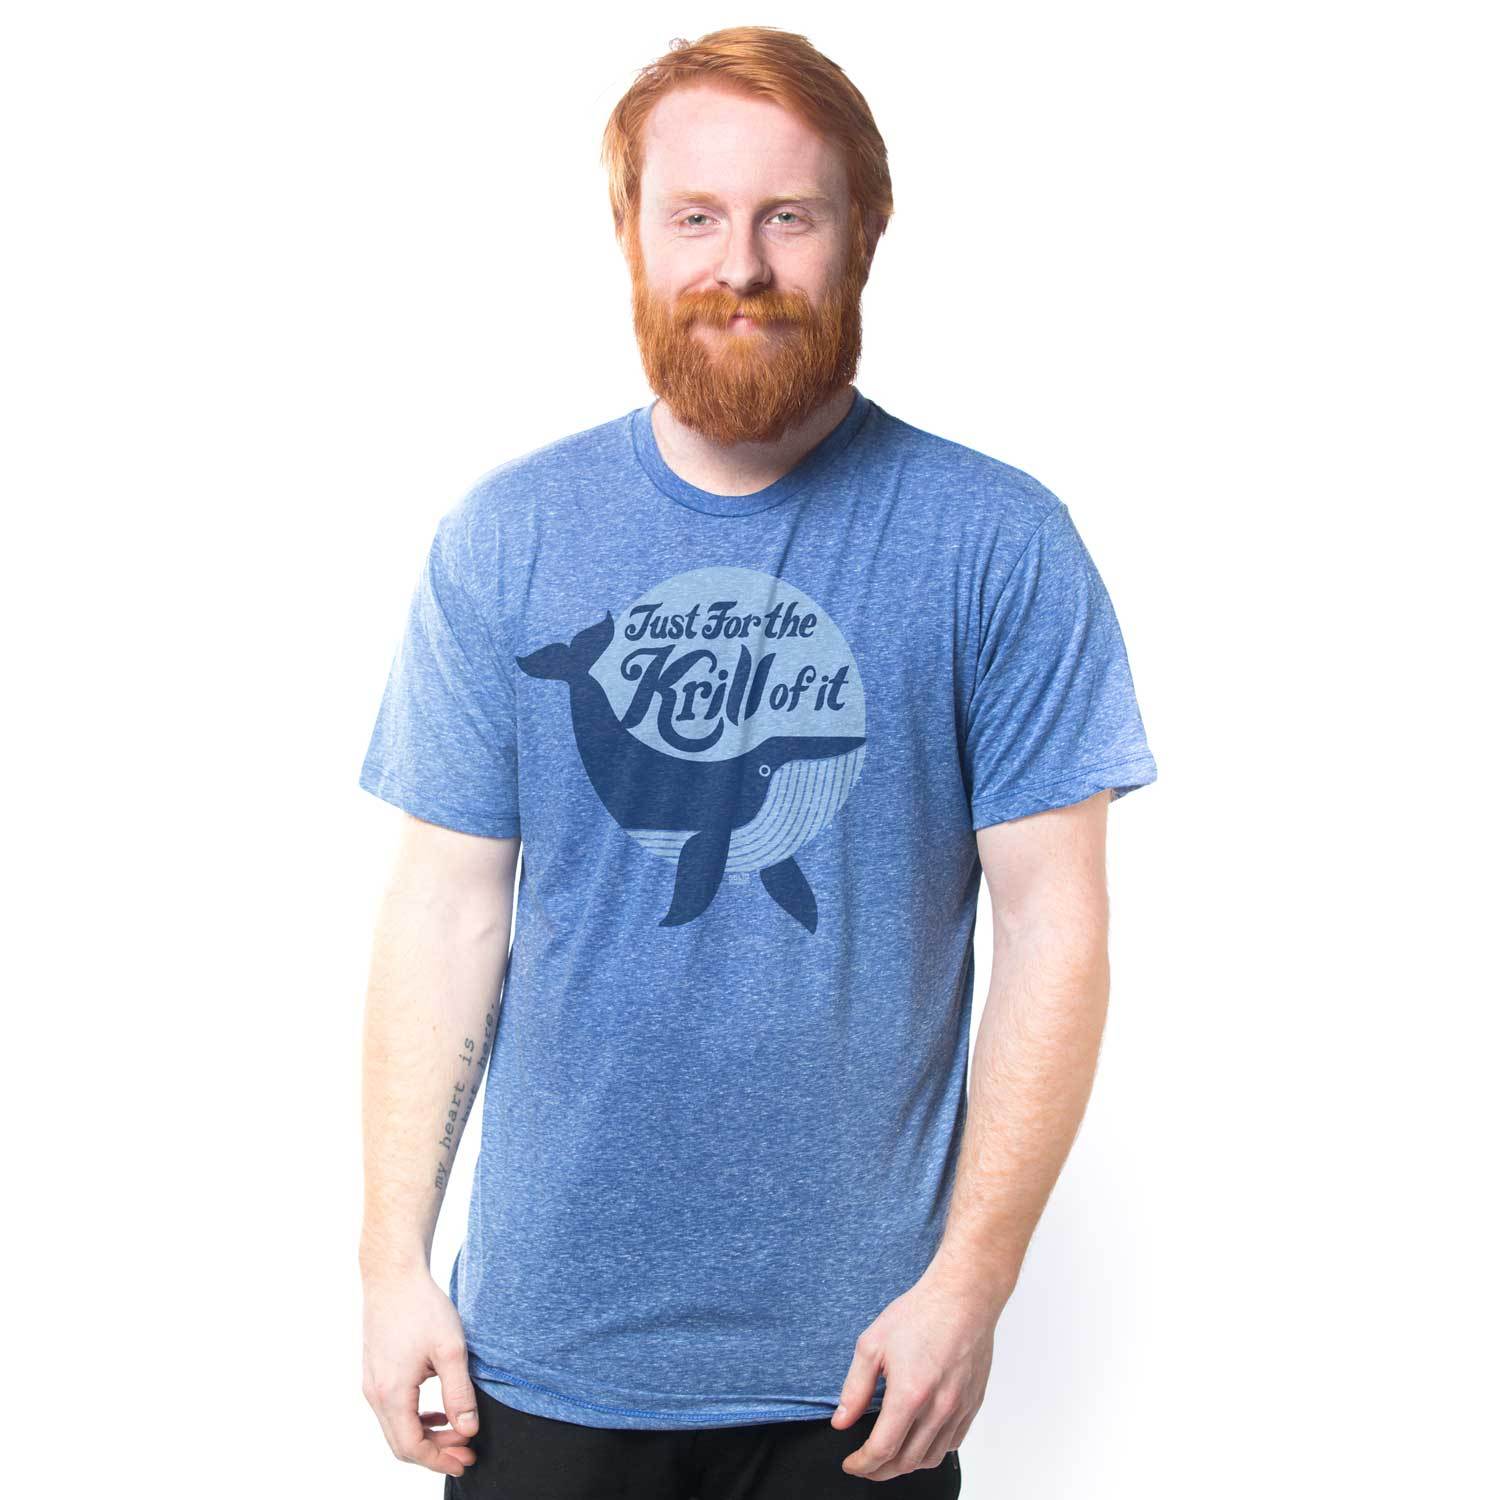 Men's Just For The Krill of It Vintage Inspired Triblend Royal Tee Shirt with Cool Funny Retro Whale Graphic